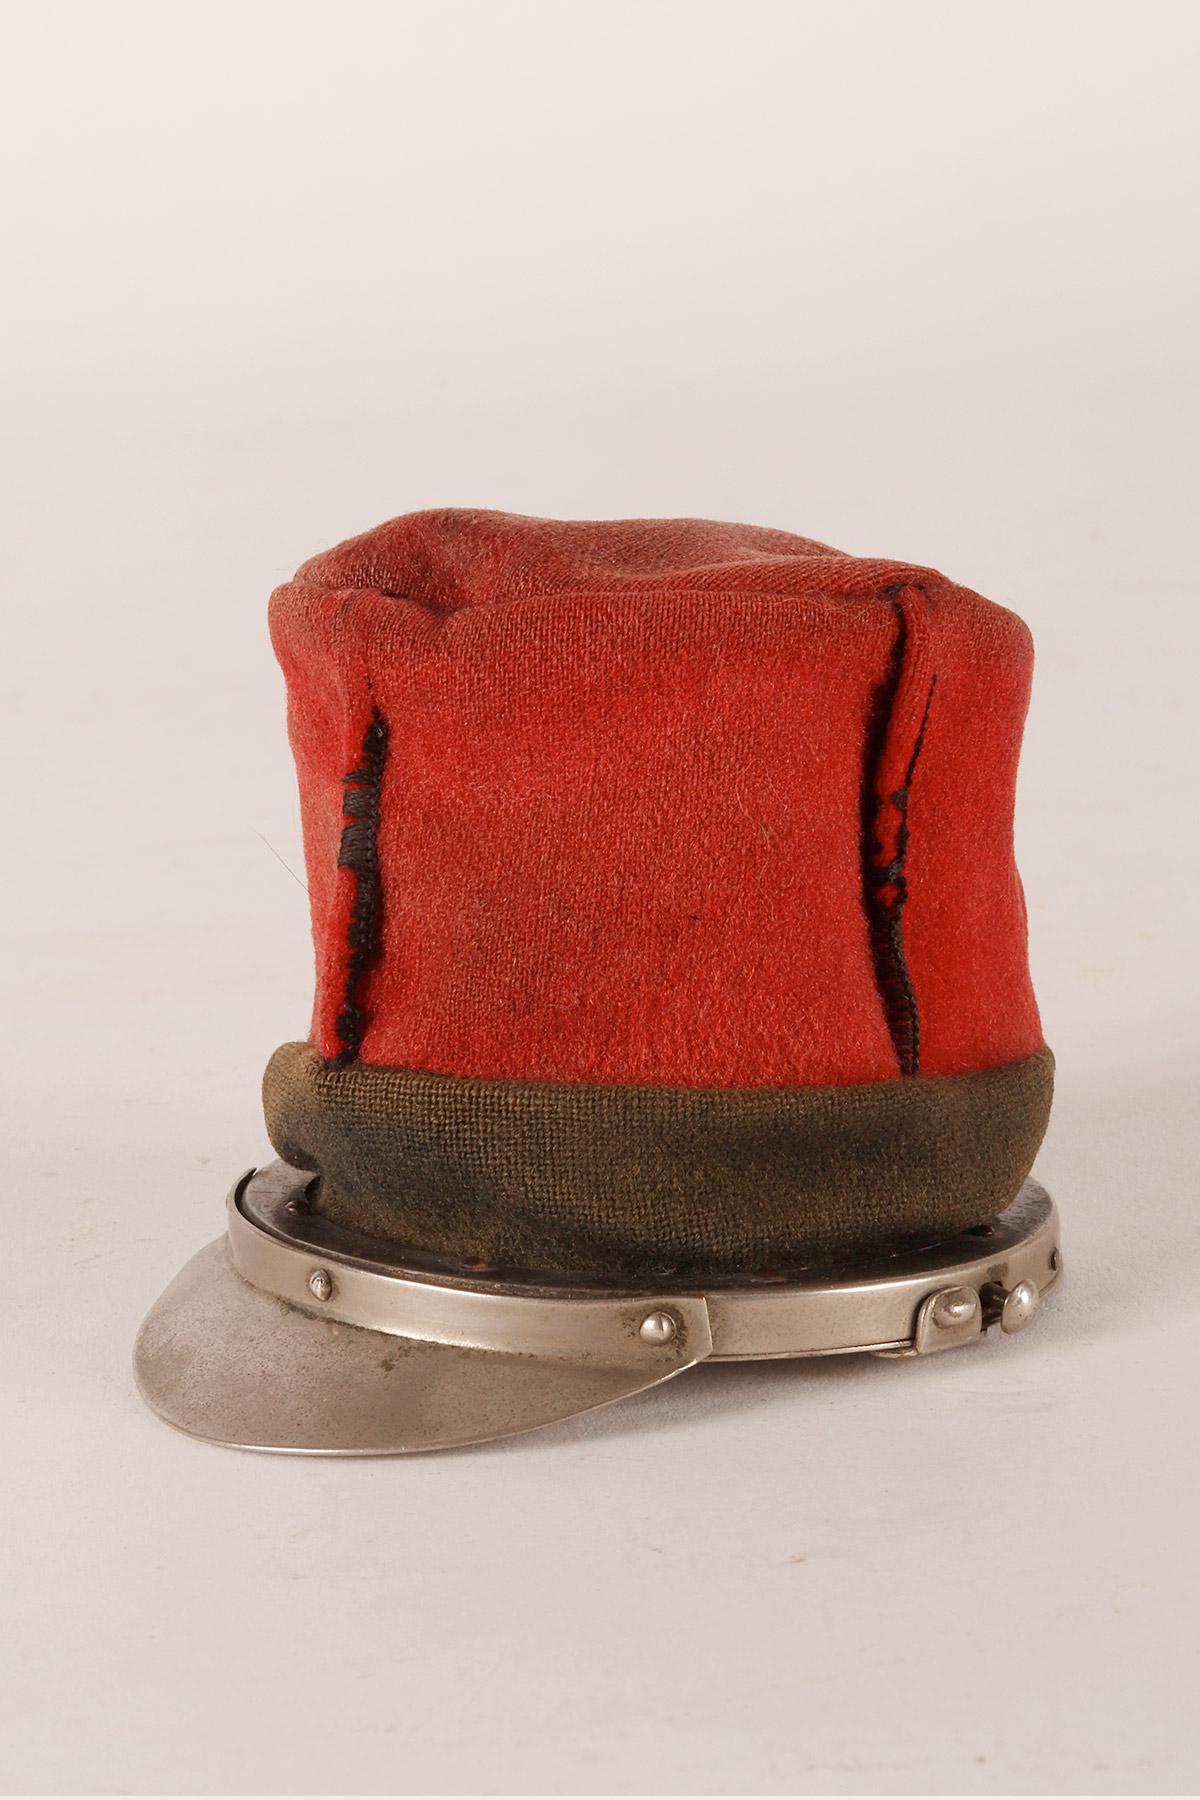 20th Century A military cap snuffbox, Paris, France beginning of 20th century. For Sale